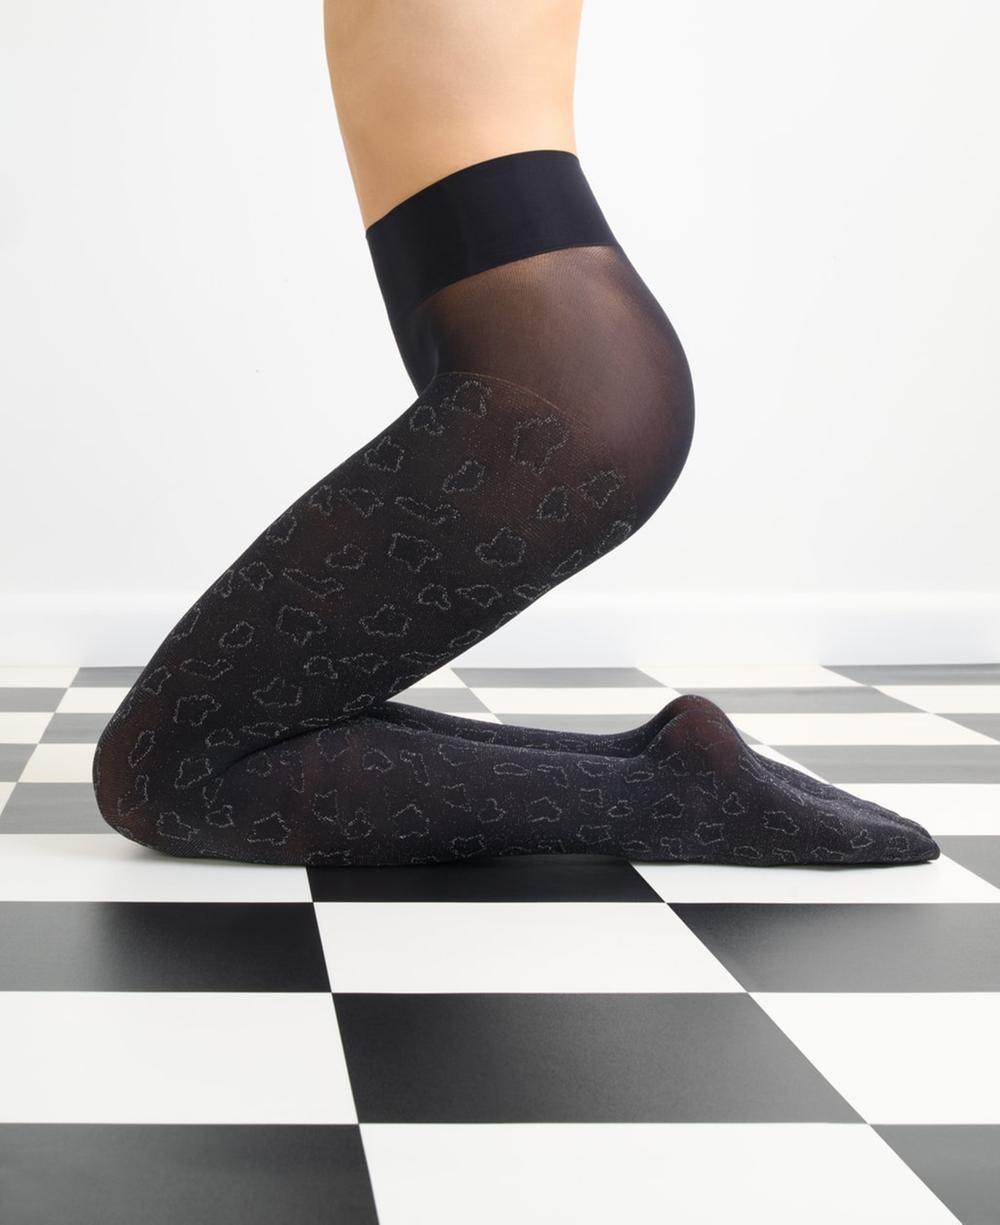 SiSi Maculato Collant - Black opaque seamless tights with a woven silver lame animal style pattern and deep comfort waist band.